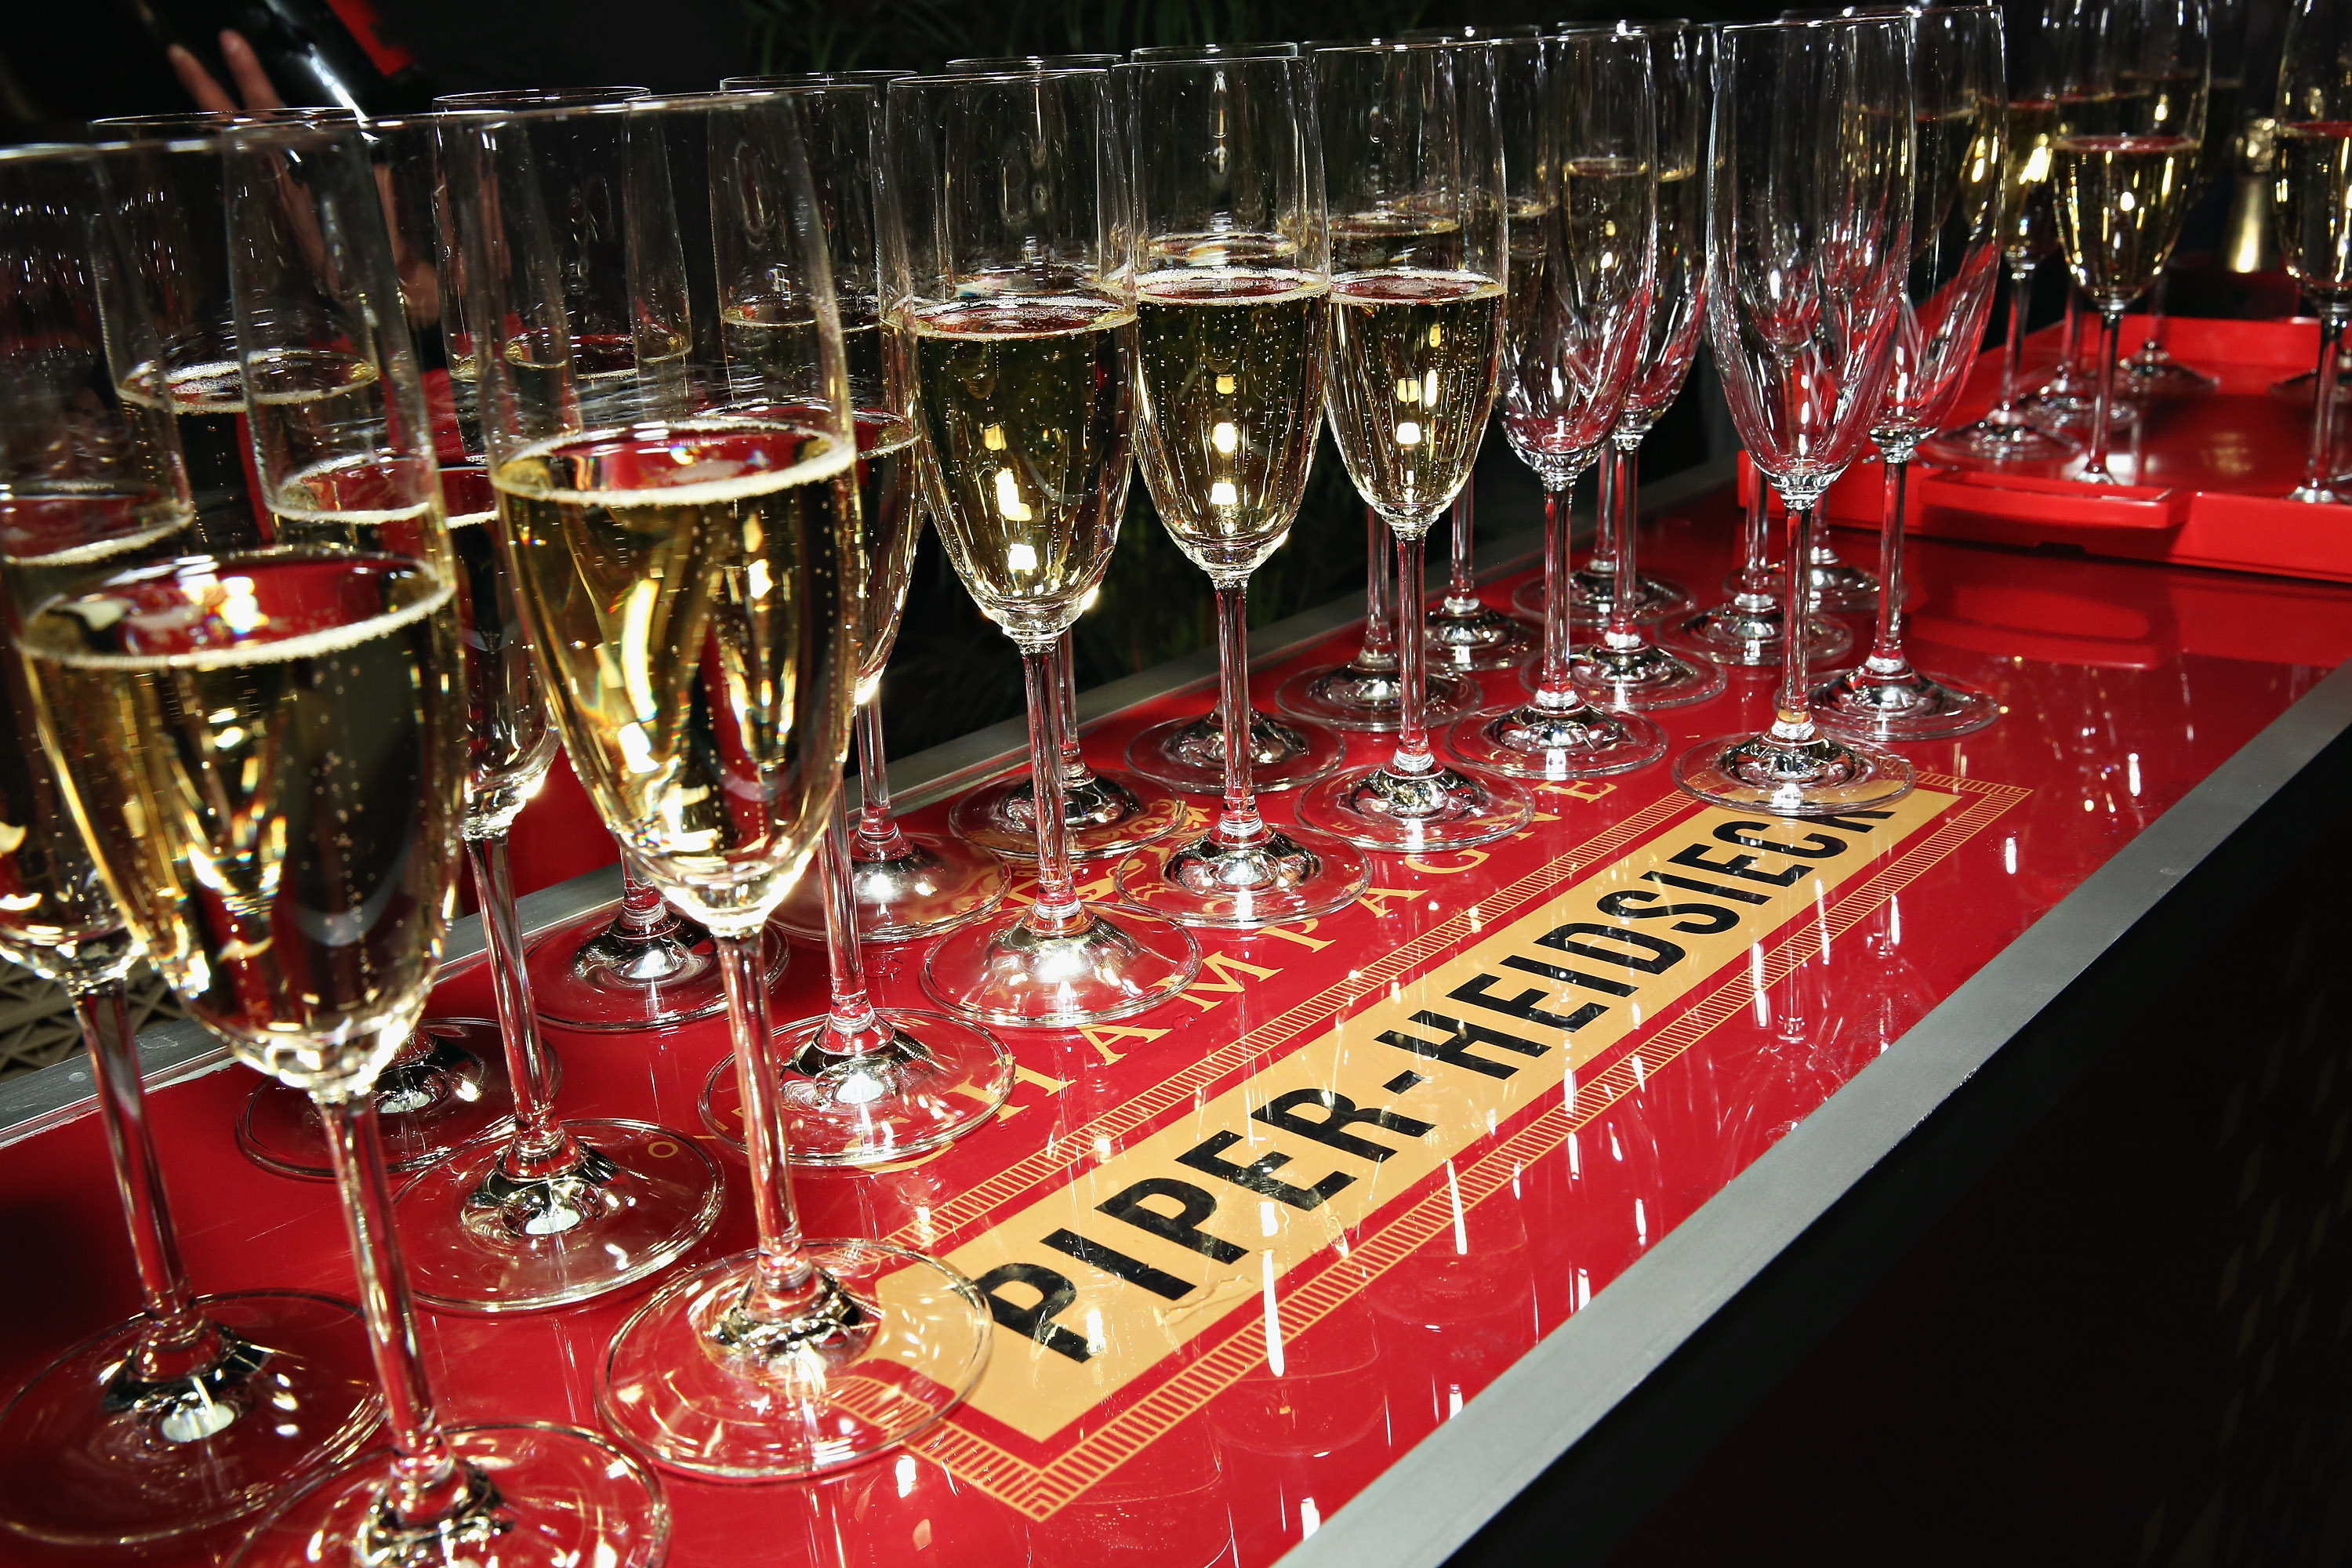 Champagne Piper-Heidsieck And Rooftop Films Present A Special Preview Of Ethan Hawke's New Documentary "Seymour: An Introduction